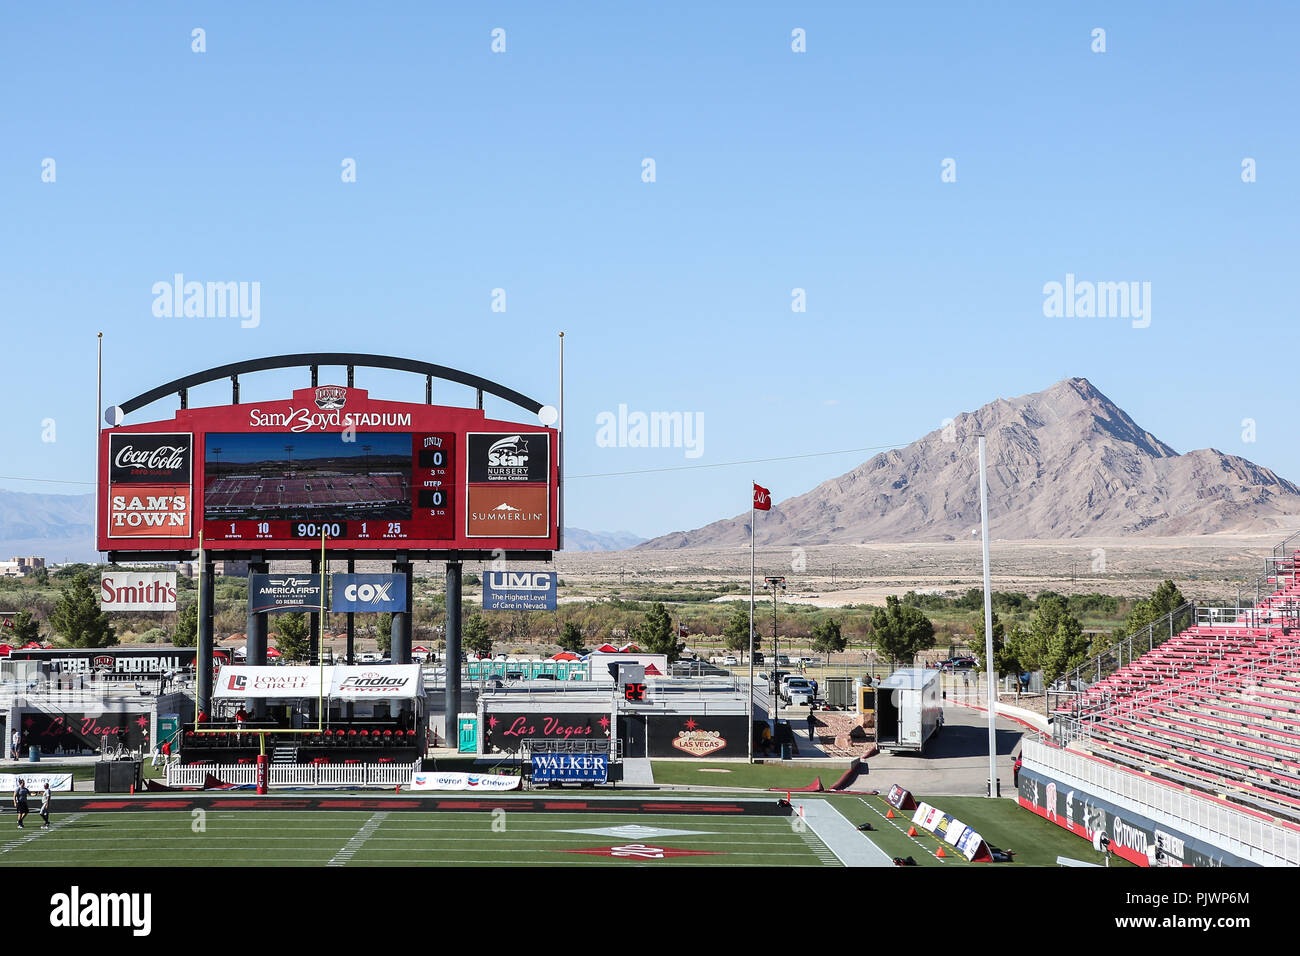 Nevada, USA. September 8, 2018: An interior view of Sam Boyd Stadium looking towards the mountains prior to the start of the NCAA football game featuring the UTEP Miners and the UNLV Rebels. Christopher Trim/CSM. Credit: Cal Sport Media/Alamy Live News Stock Photo